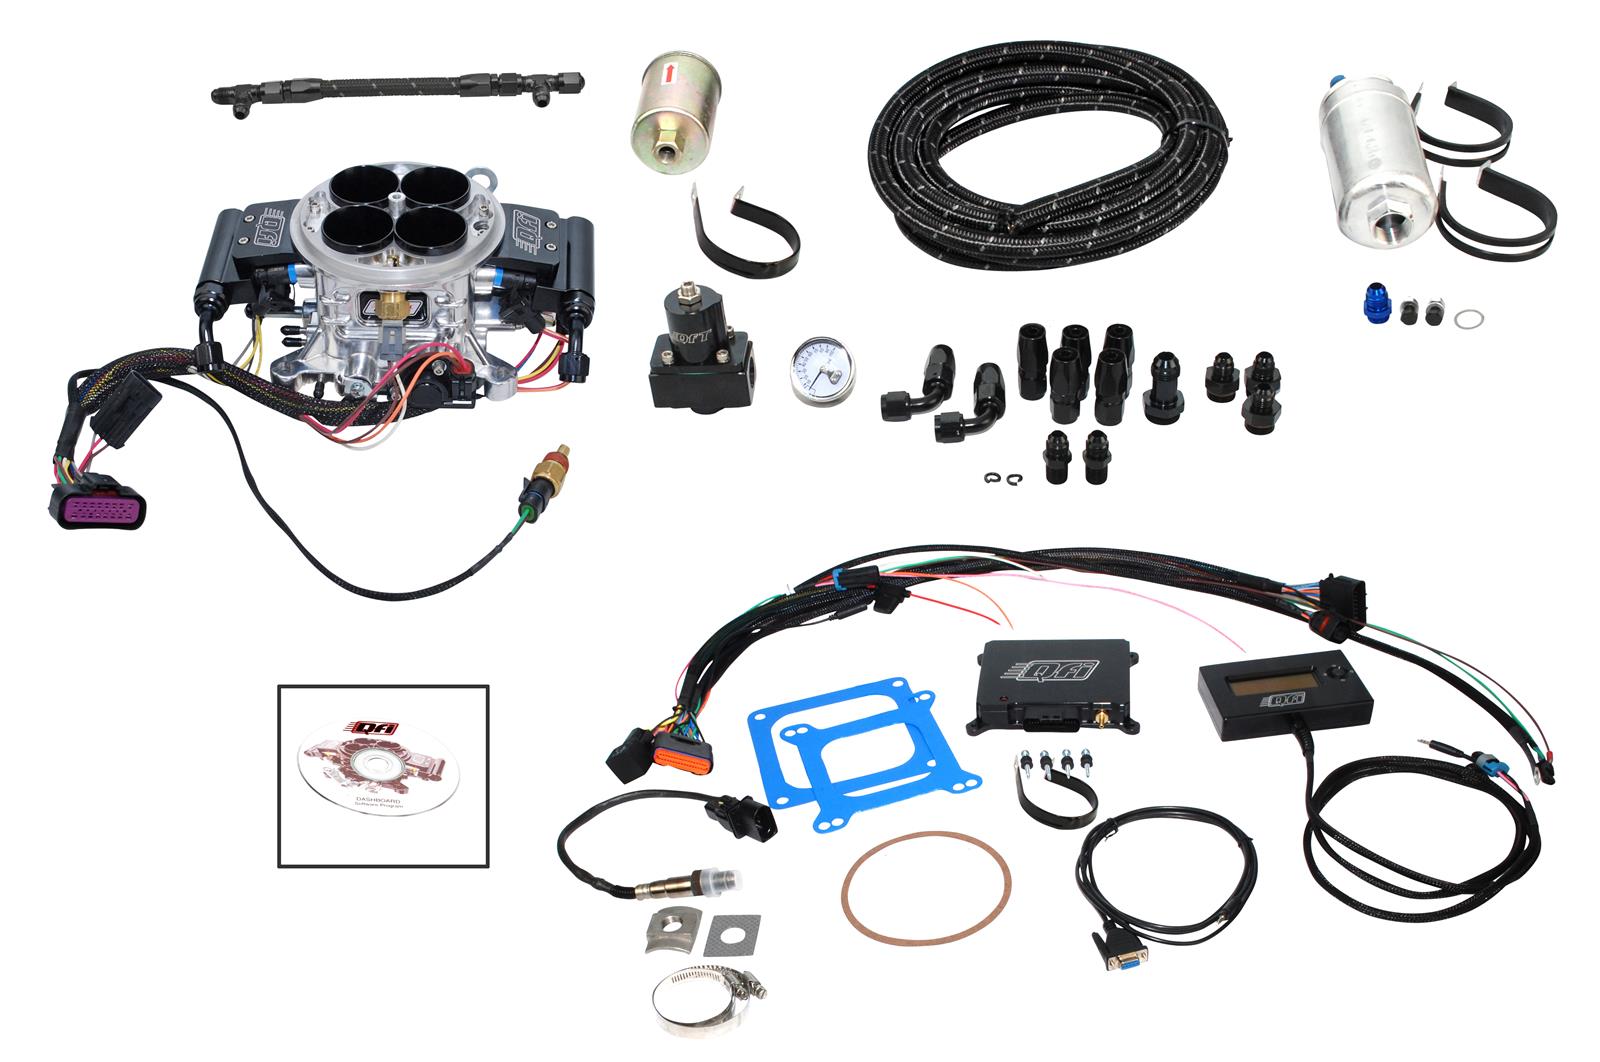 Efi system. Master Kit запчасти. Electronic fuel Injection. Koll Injection System. Master Injection.